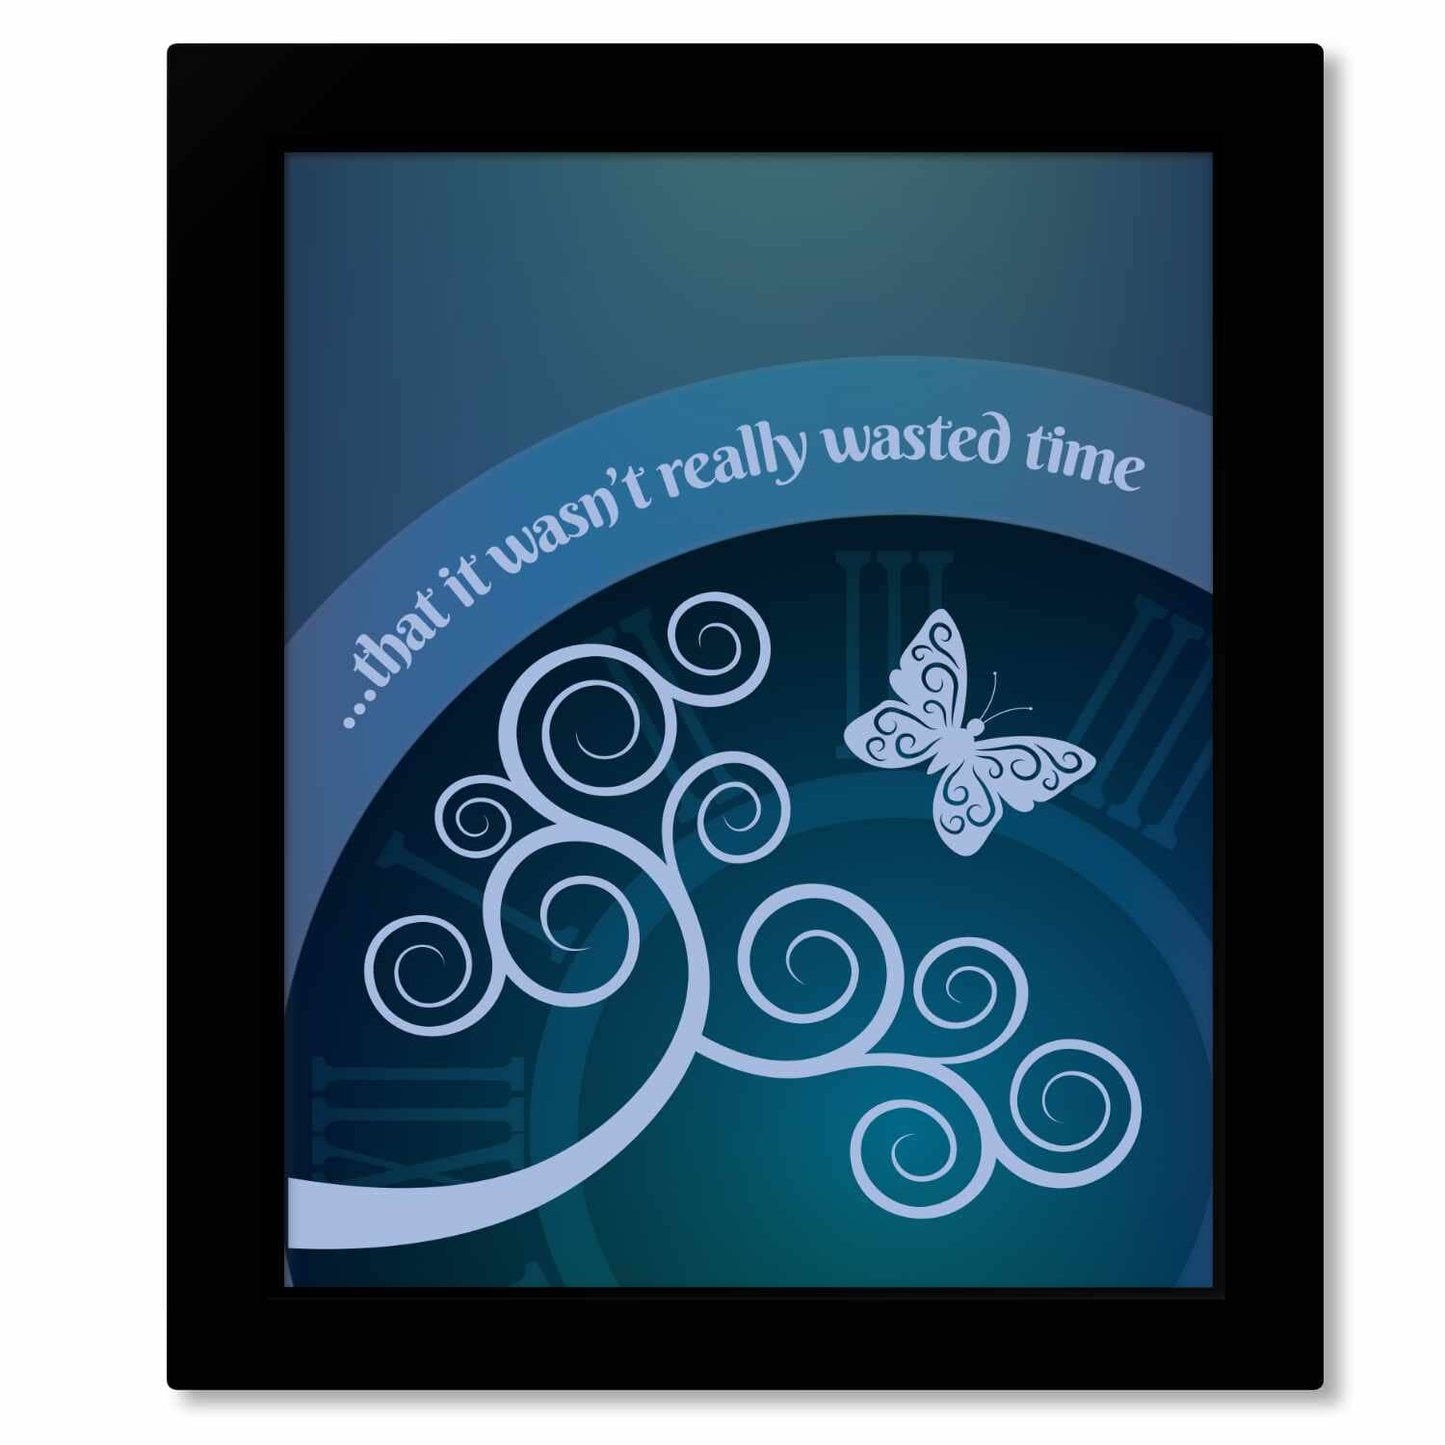 Wasted Time by the Eagles - Song Lyric Modern Art Print Song Lyrics Art Song Lyrics Art 8x10 Framed Print 